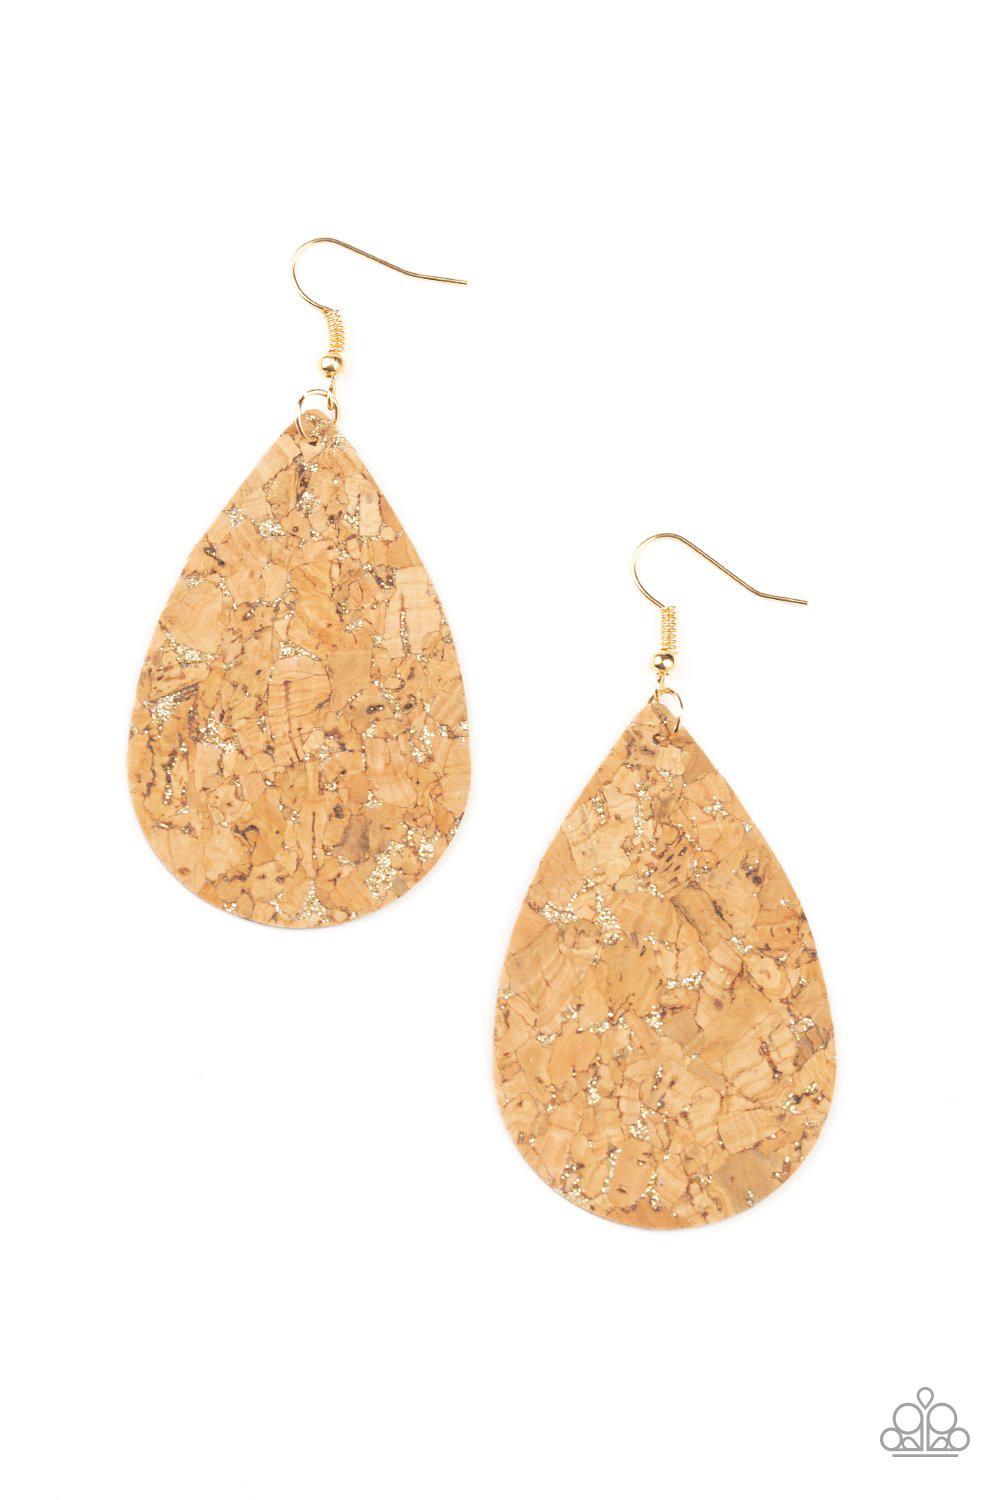 CORK It Over Gold and Cork Teardrop Earrings - Paparazzi Accessories-CarasShop.com - $5 Jewelry by Cara Jewels